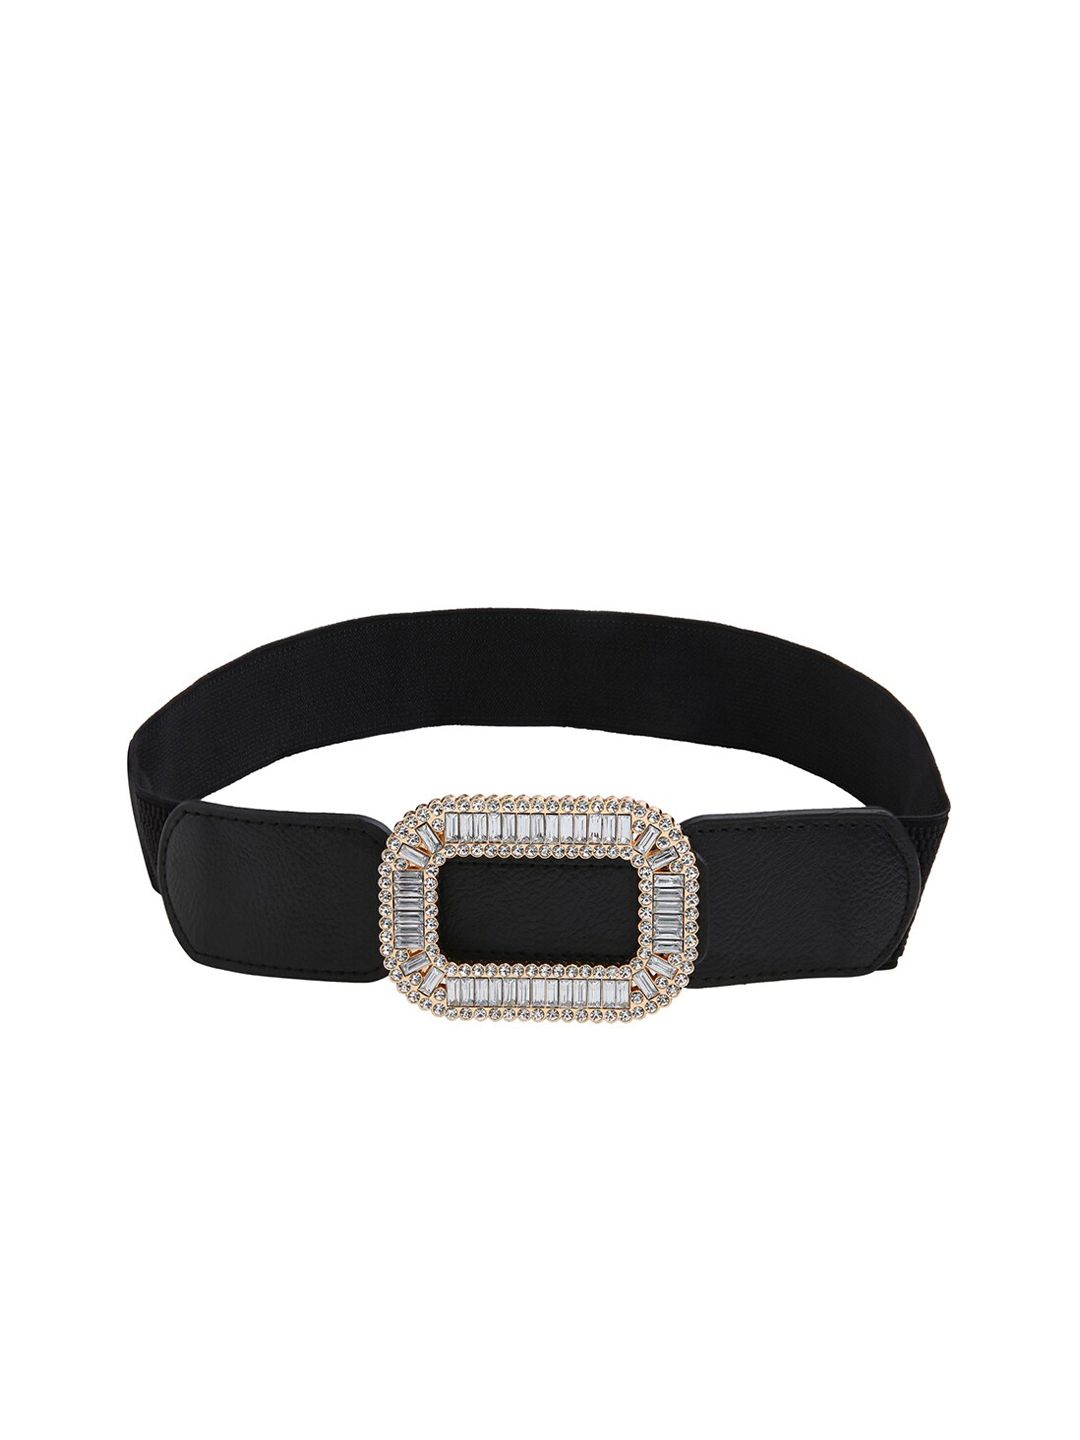 CRUSSET Women Black Belt with Embellished Closure Price in India